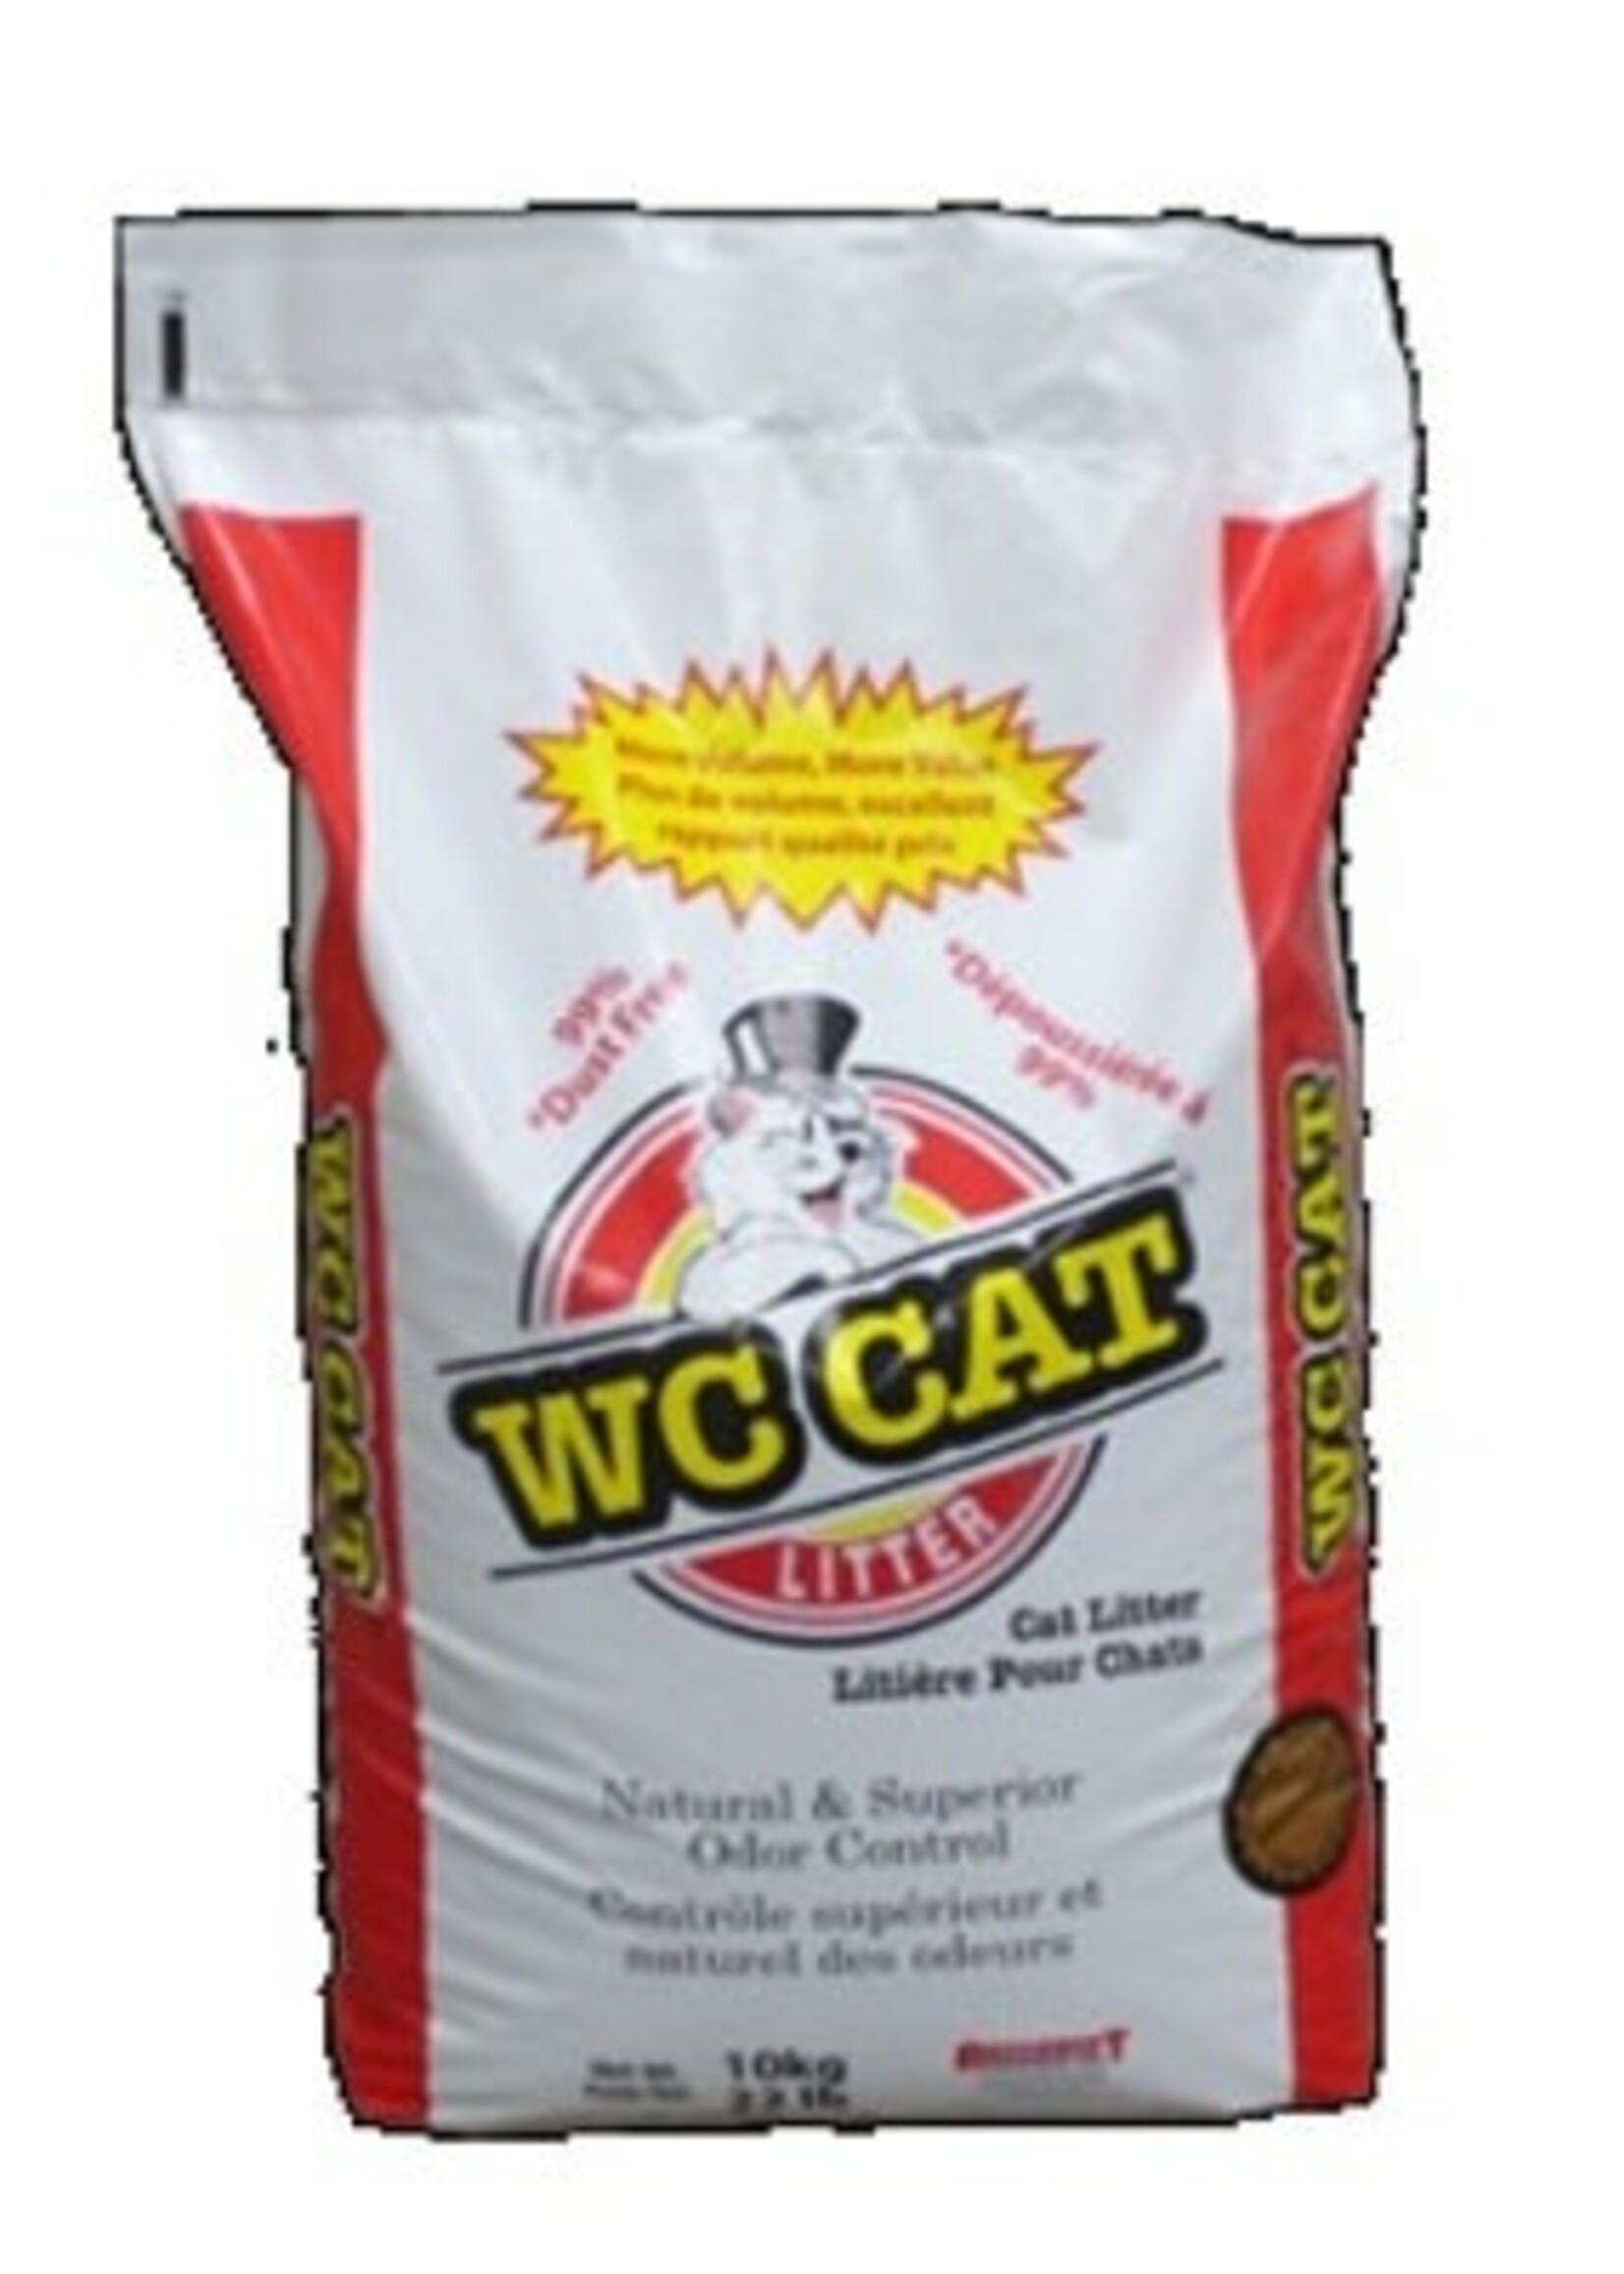 Absorbent Products Ltd. WC Cat Traditional Non Clumping